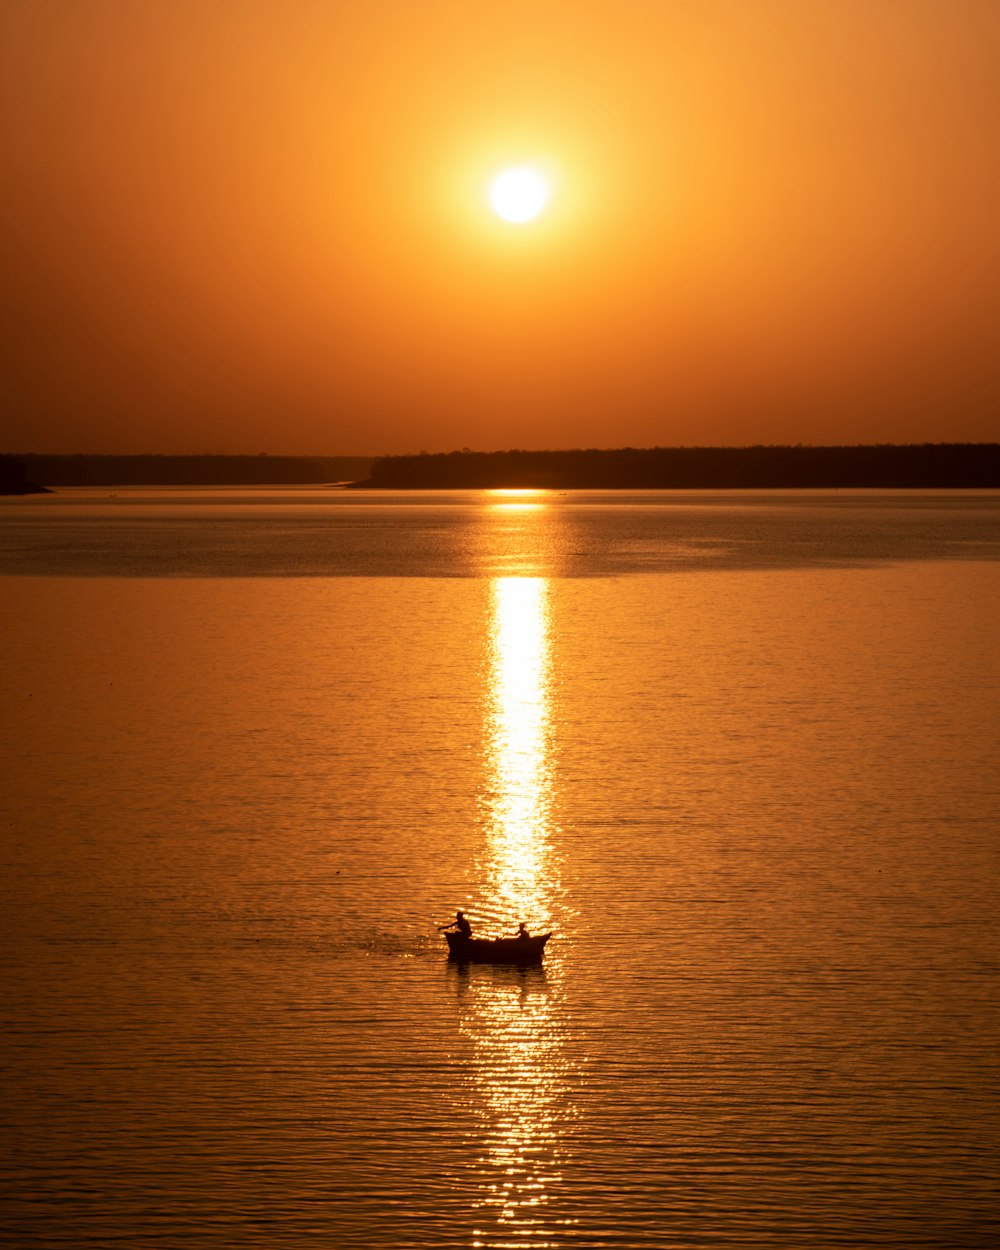 silhouette of person riding on boat on sea during sunset